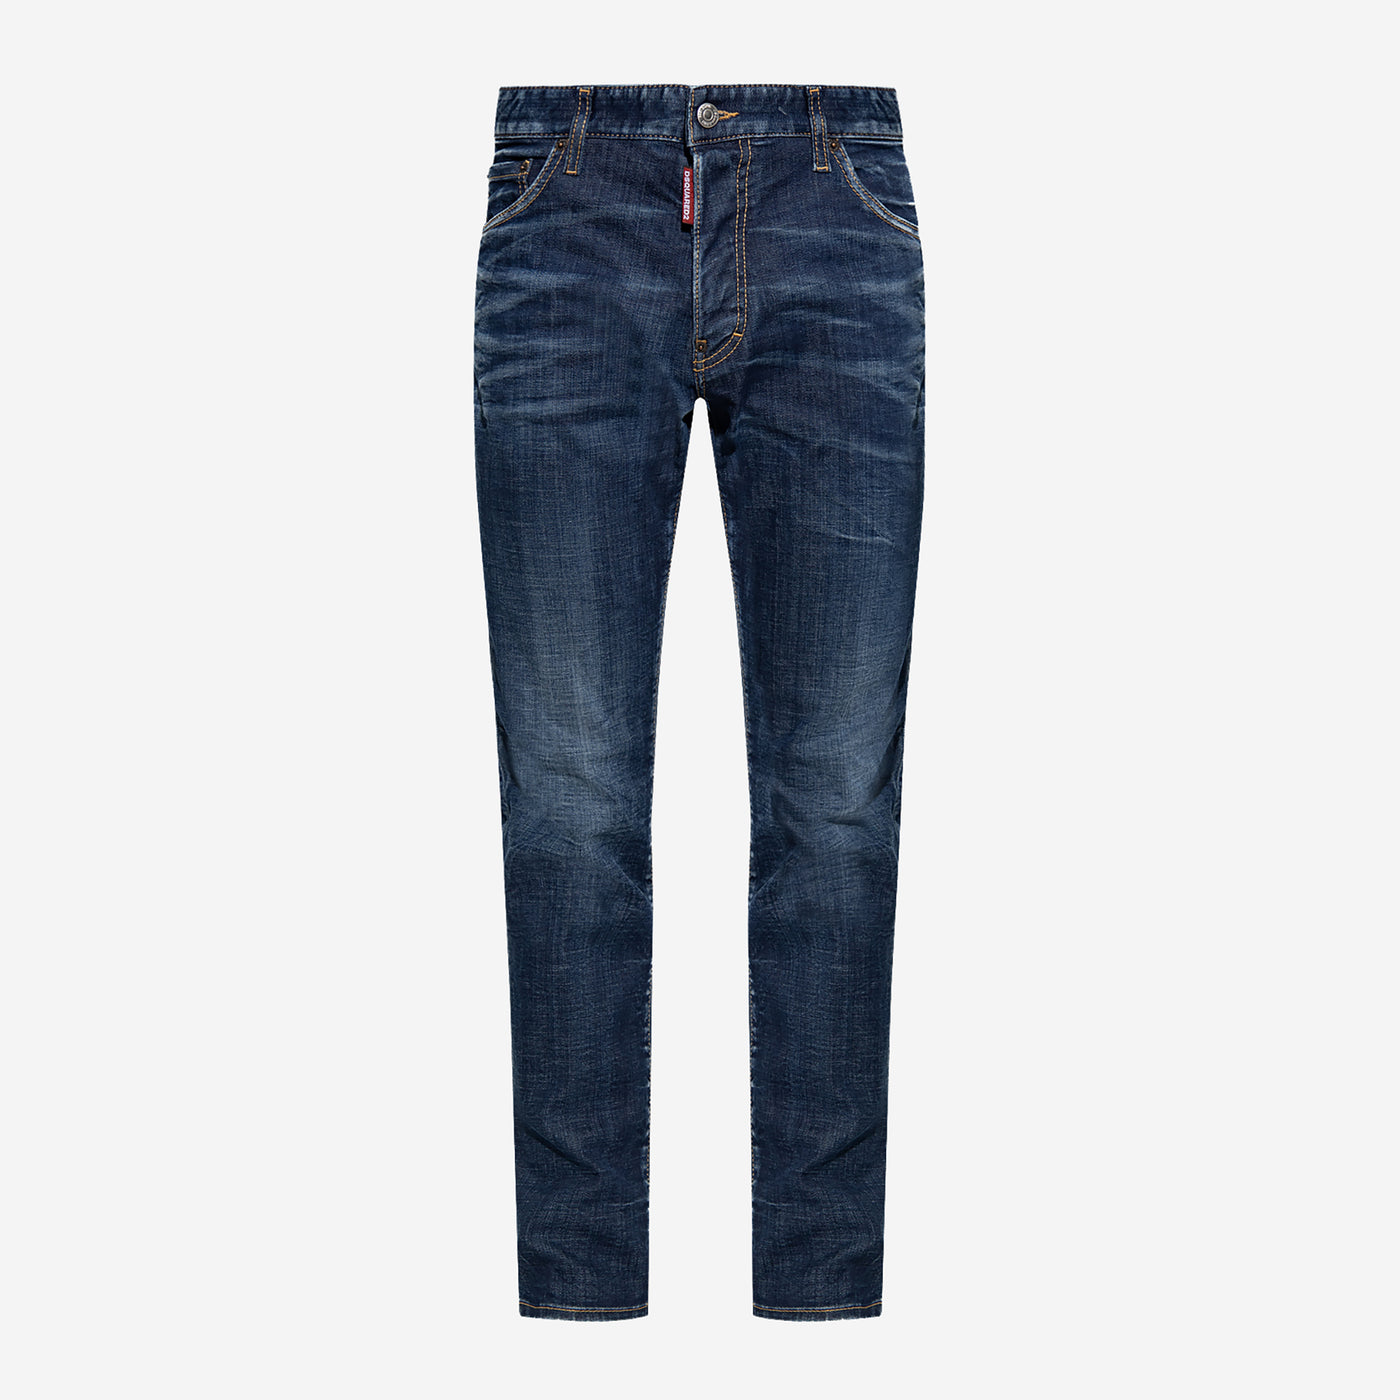 DSquared2 Cool Guy Jeans